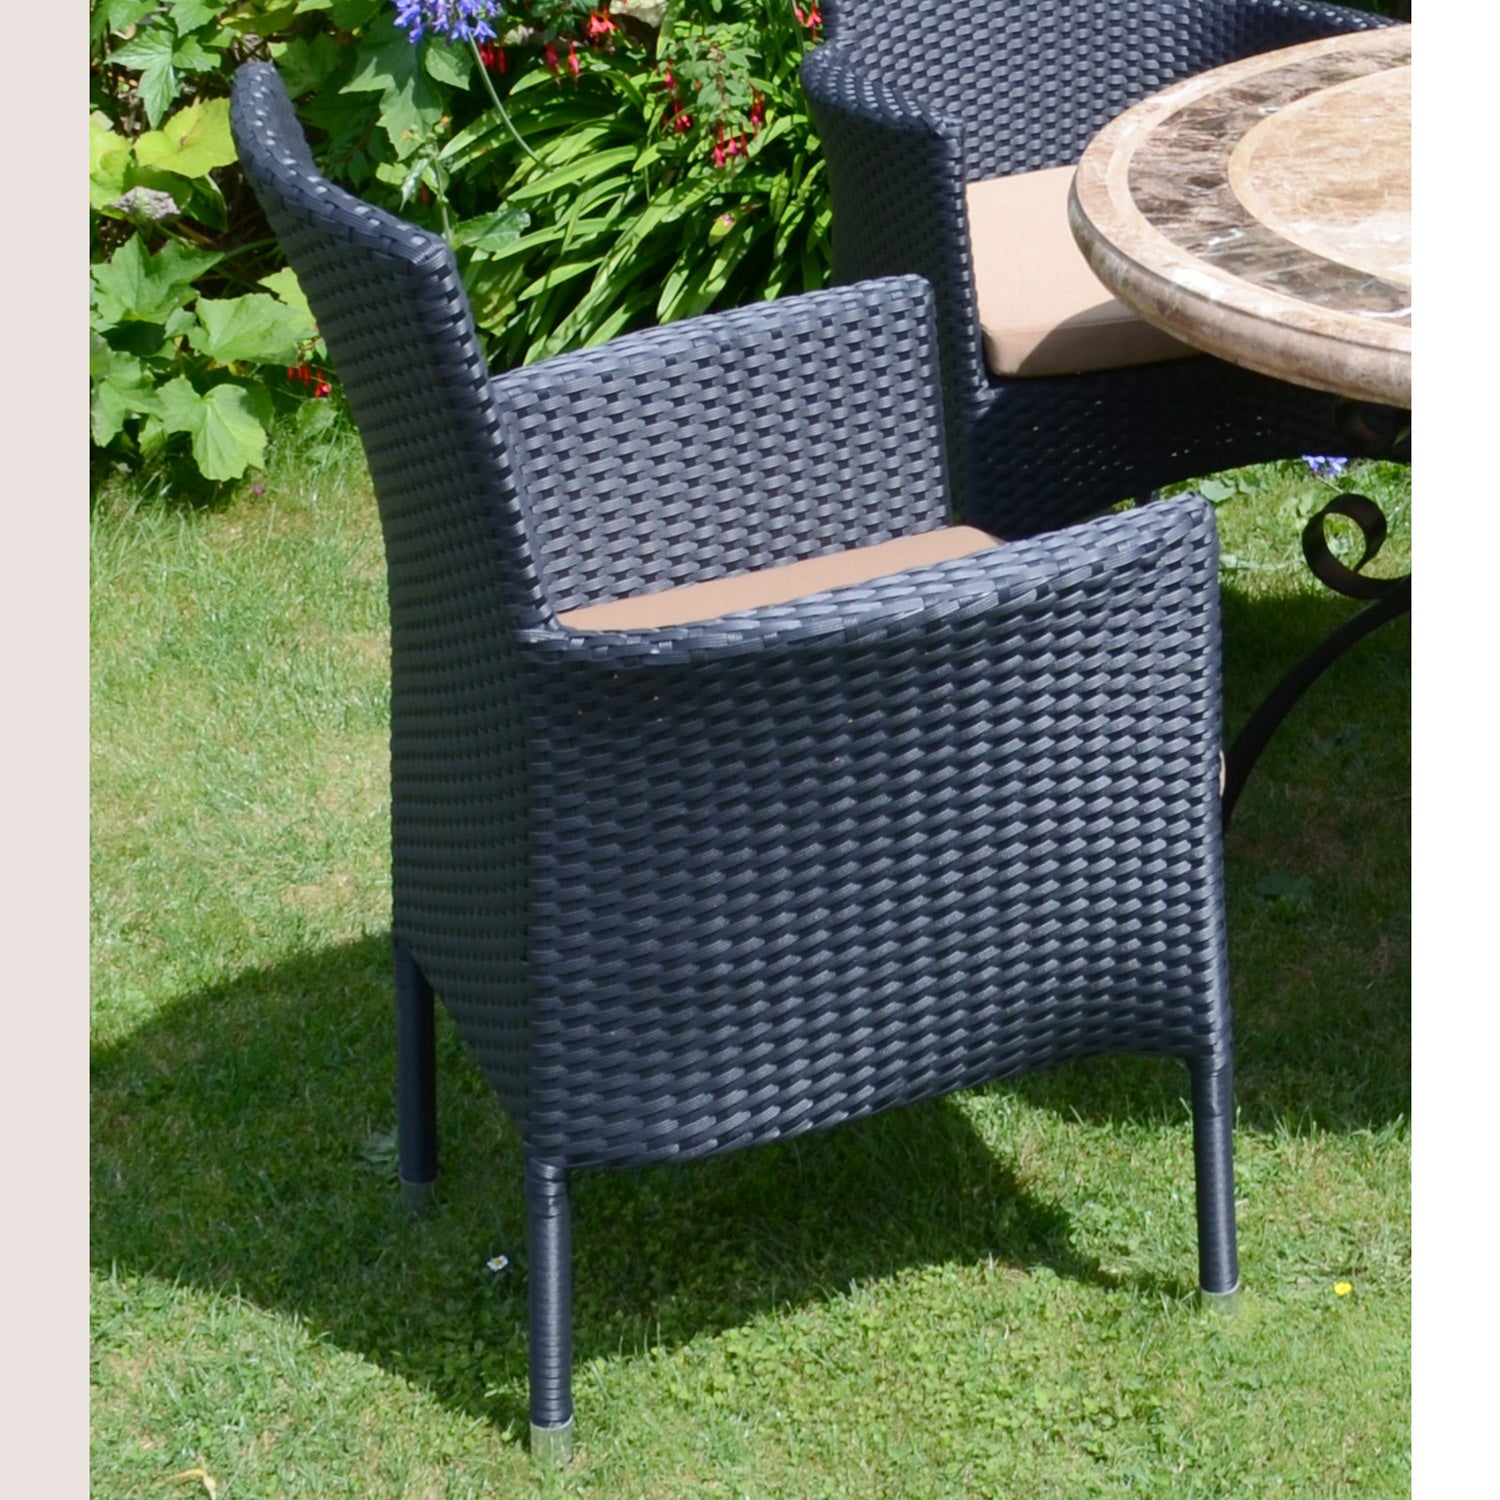 Europa Leisure Stockholm Outdoor Chair Black (Pack of 2) Chairs Europa Leisure   